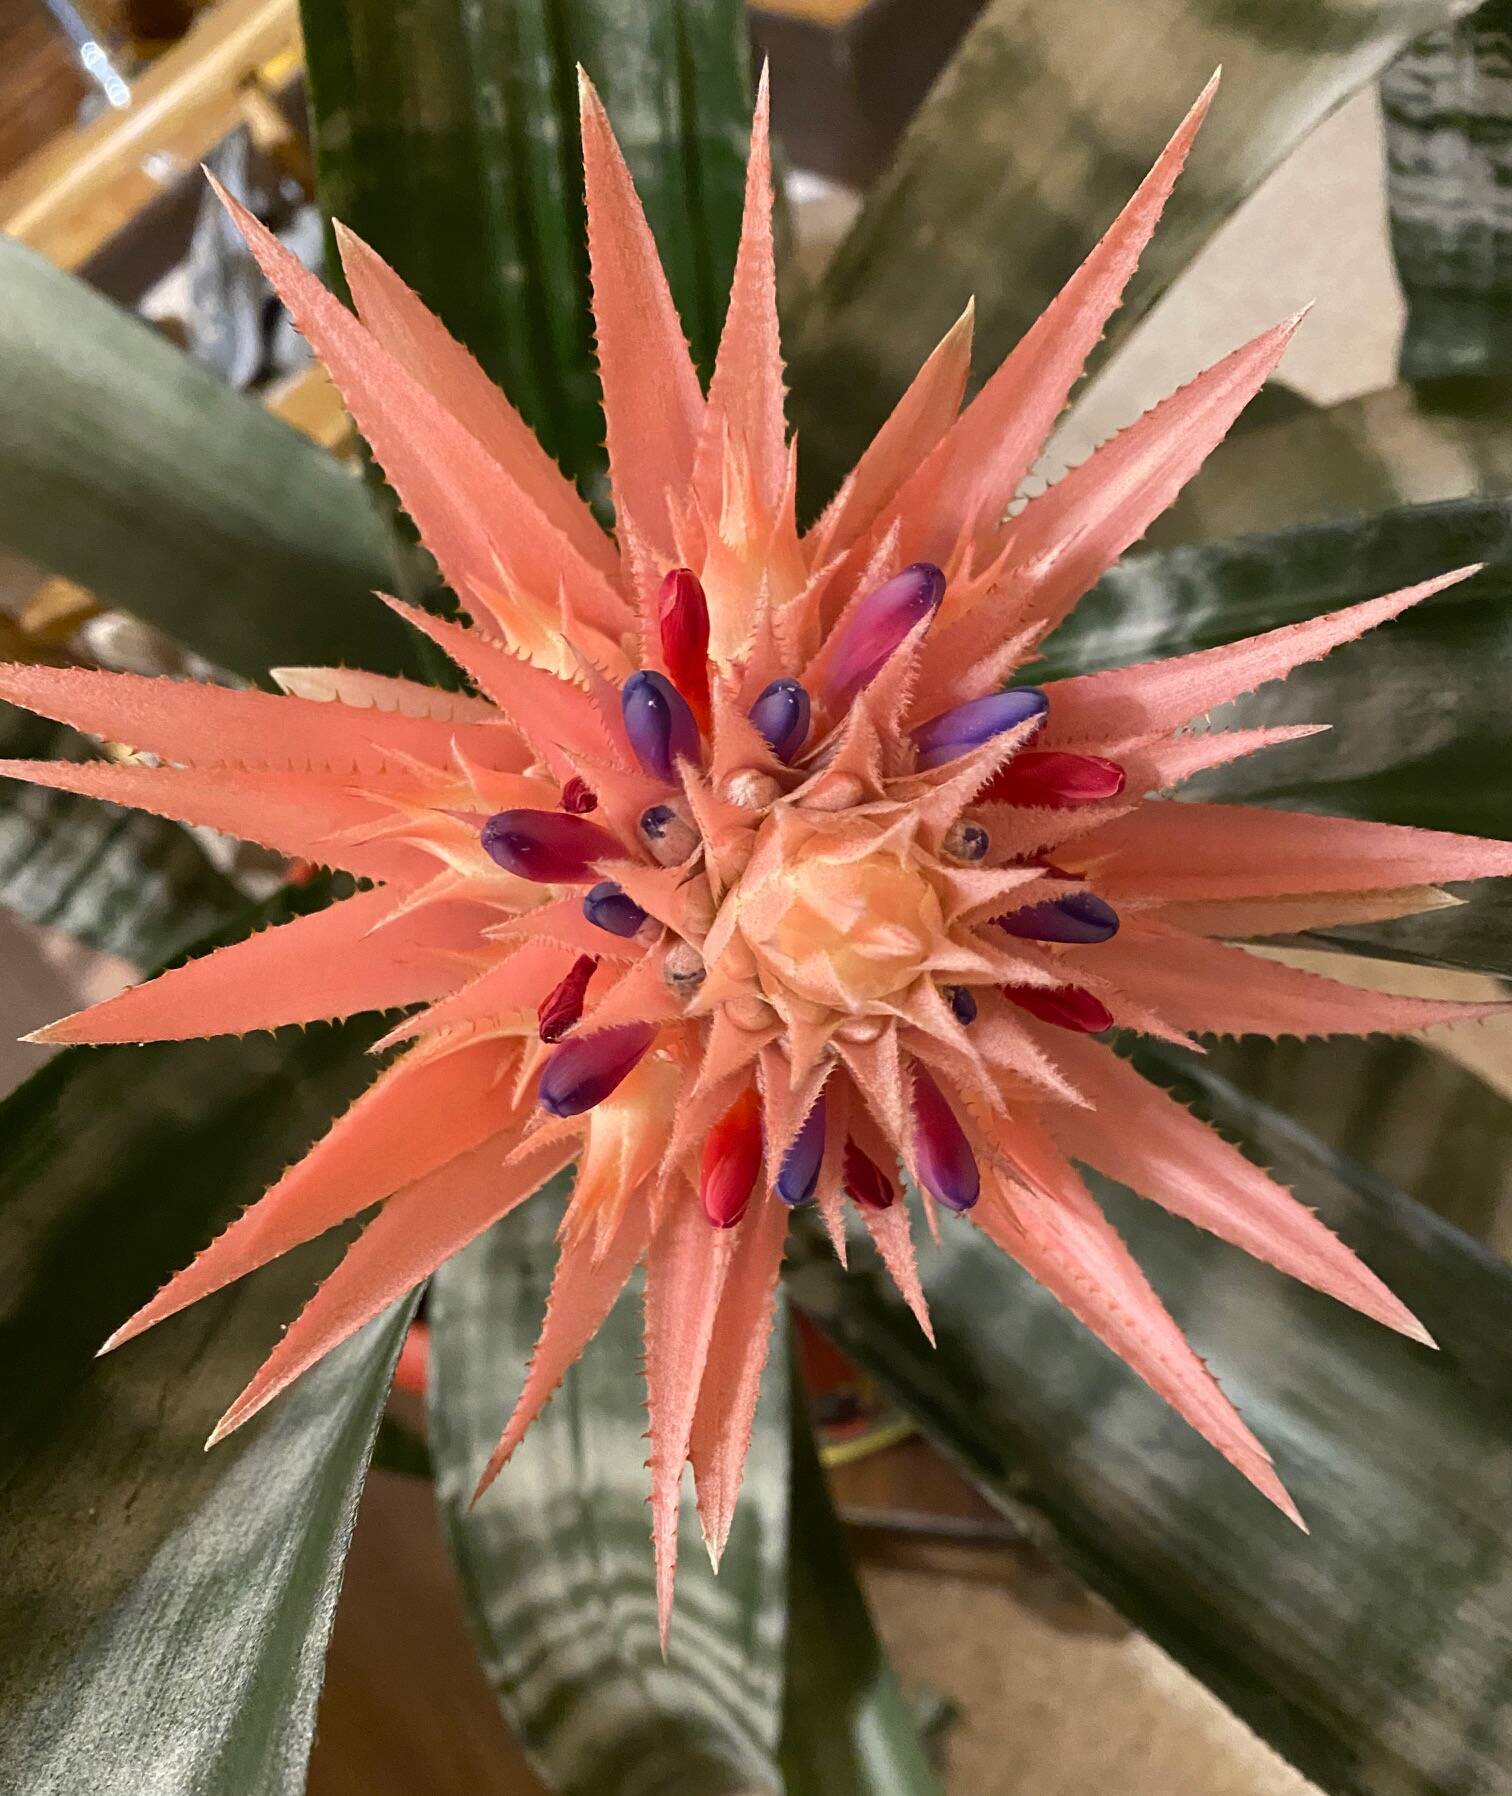 Resembling a starburst is a bromeliad flower in full bloom near Mile 2. (Courtesy Photo / Denise Carroll)